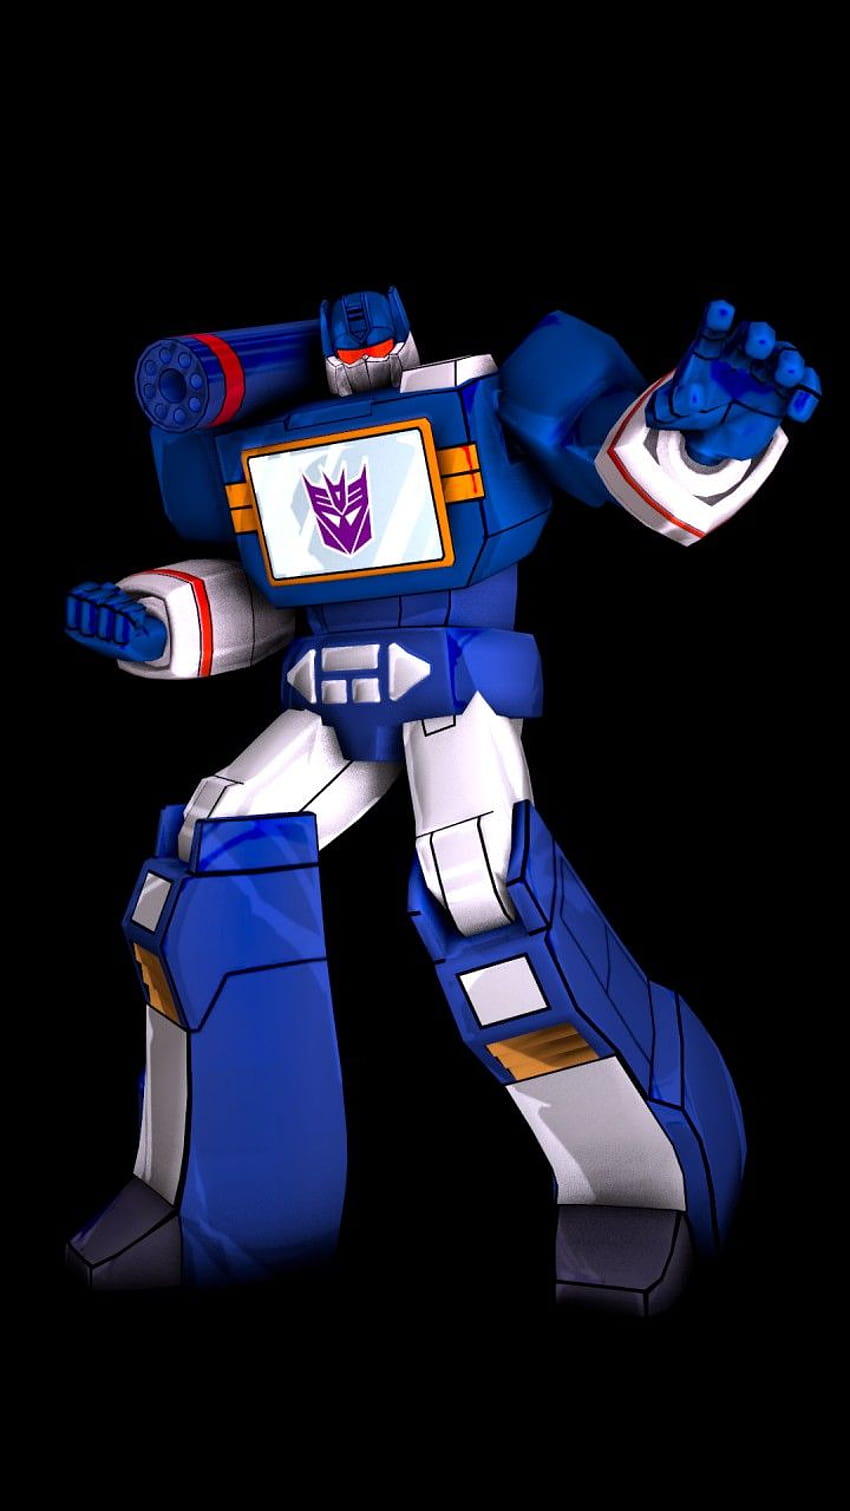 G1 Soundwave mobile phone backgrounds by ravingshadow, transformers g1 soundwave HD phone wallpaper